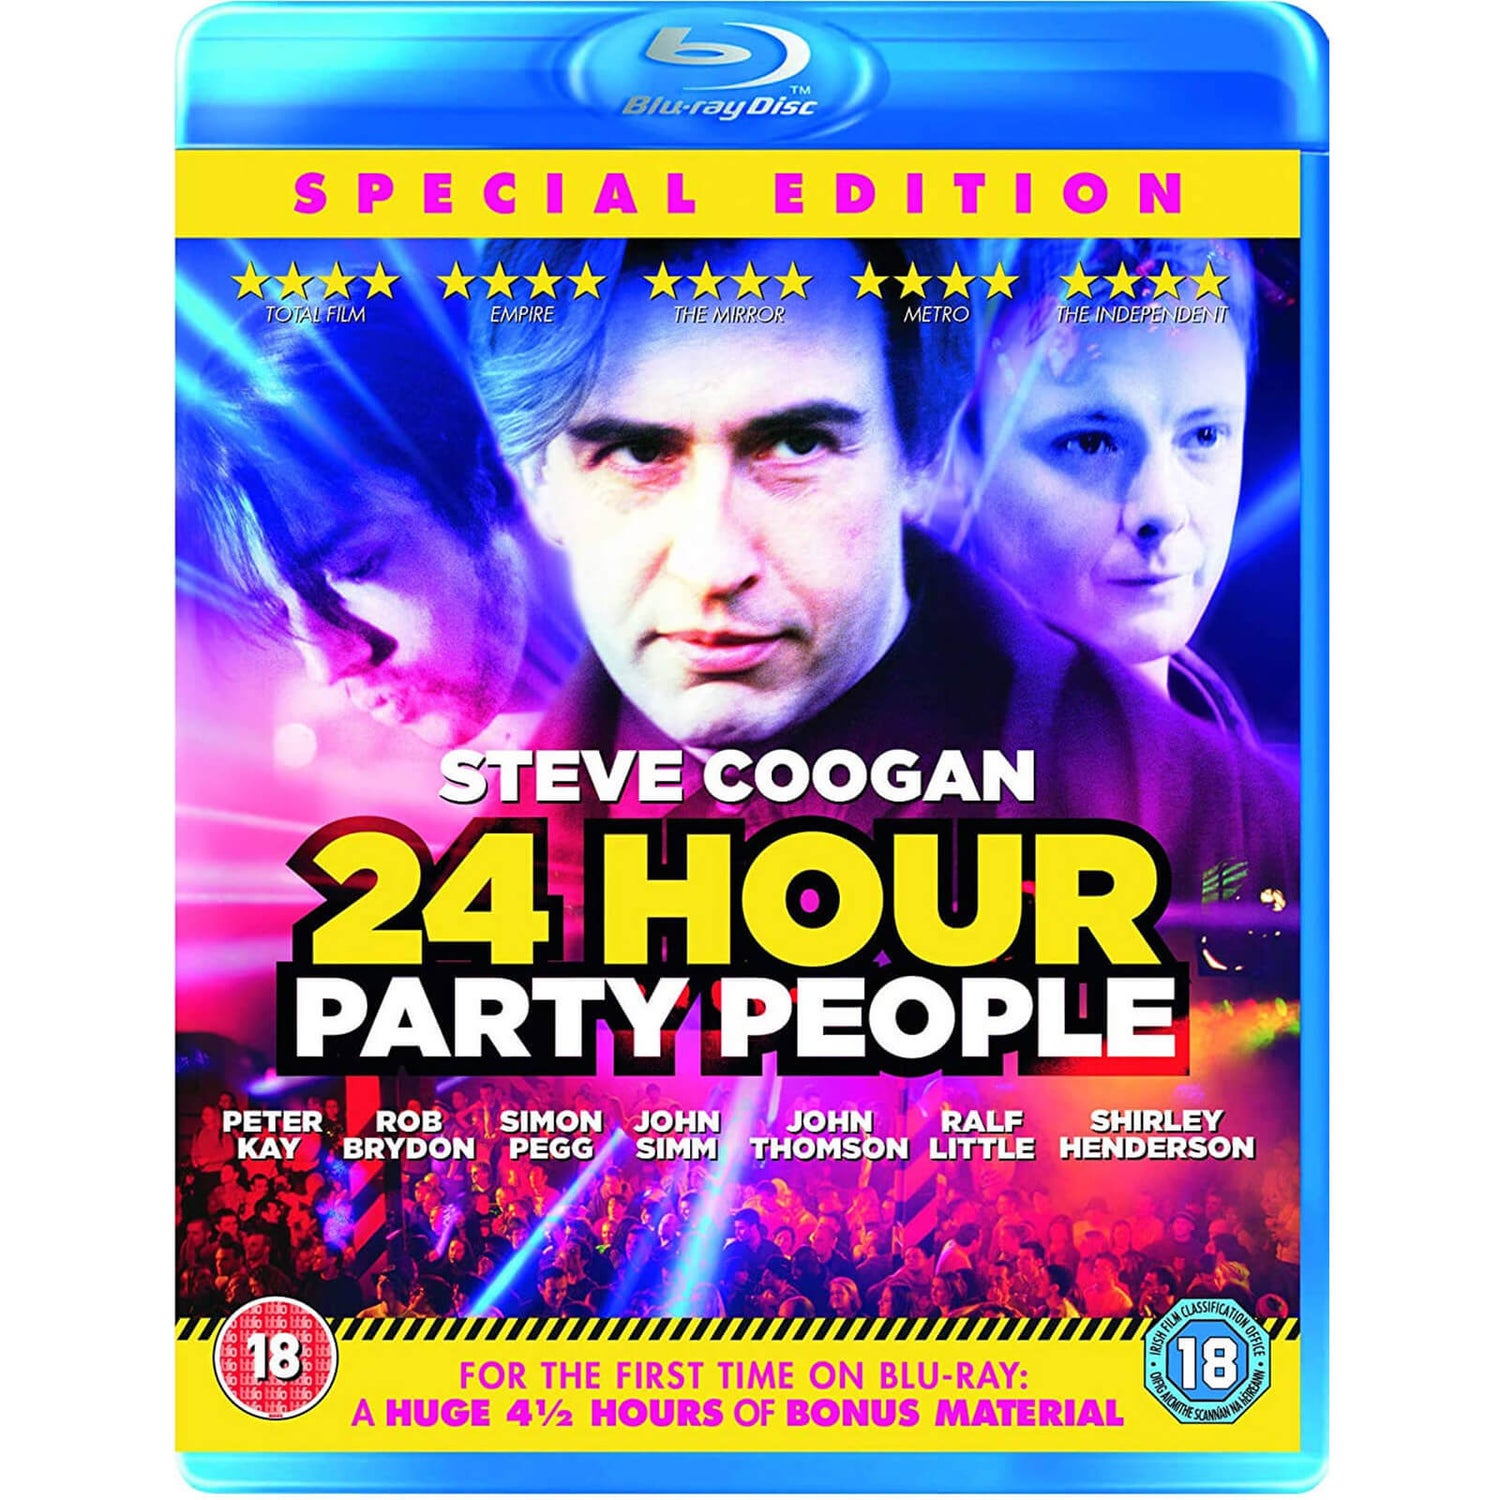 24 Hour Party People: Special Edition